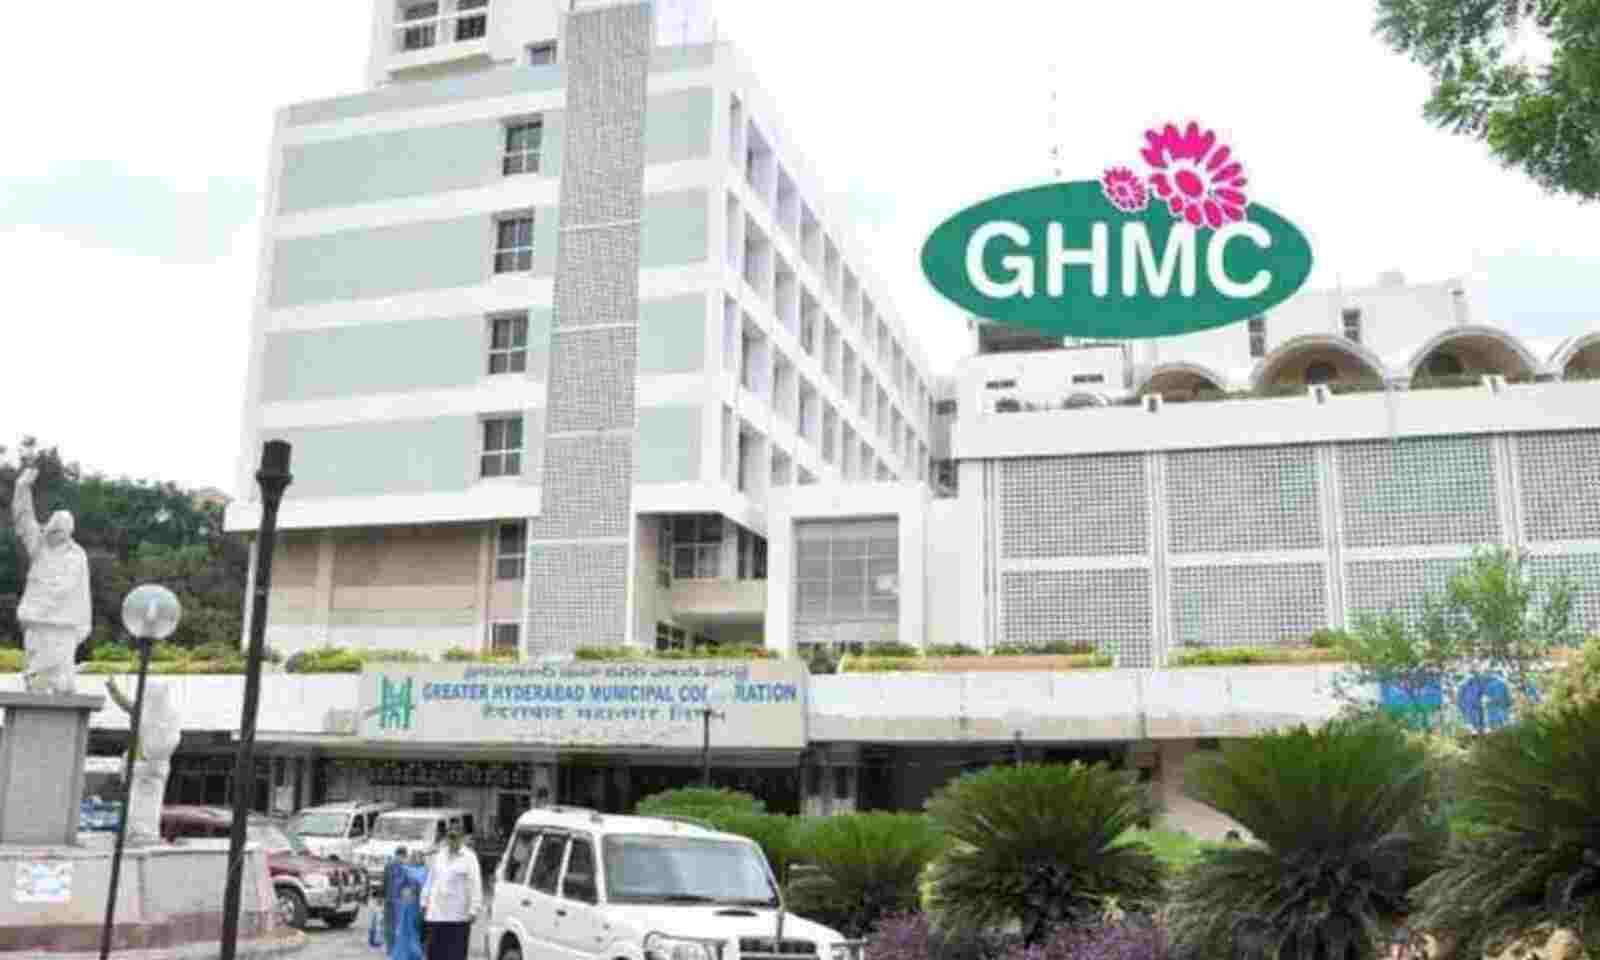 GHMC to complete above 35,000 2BHKs by March